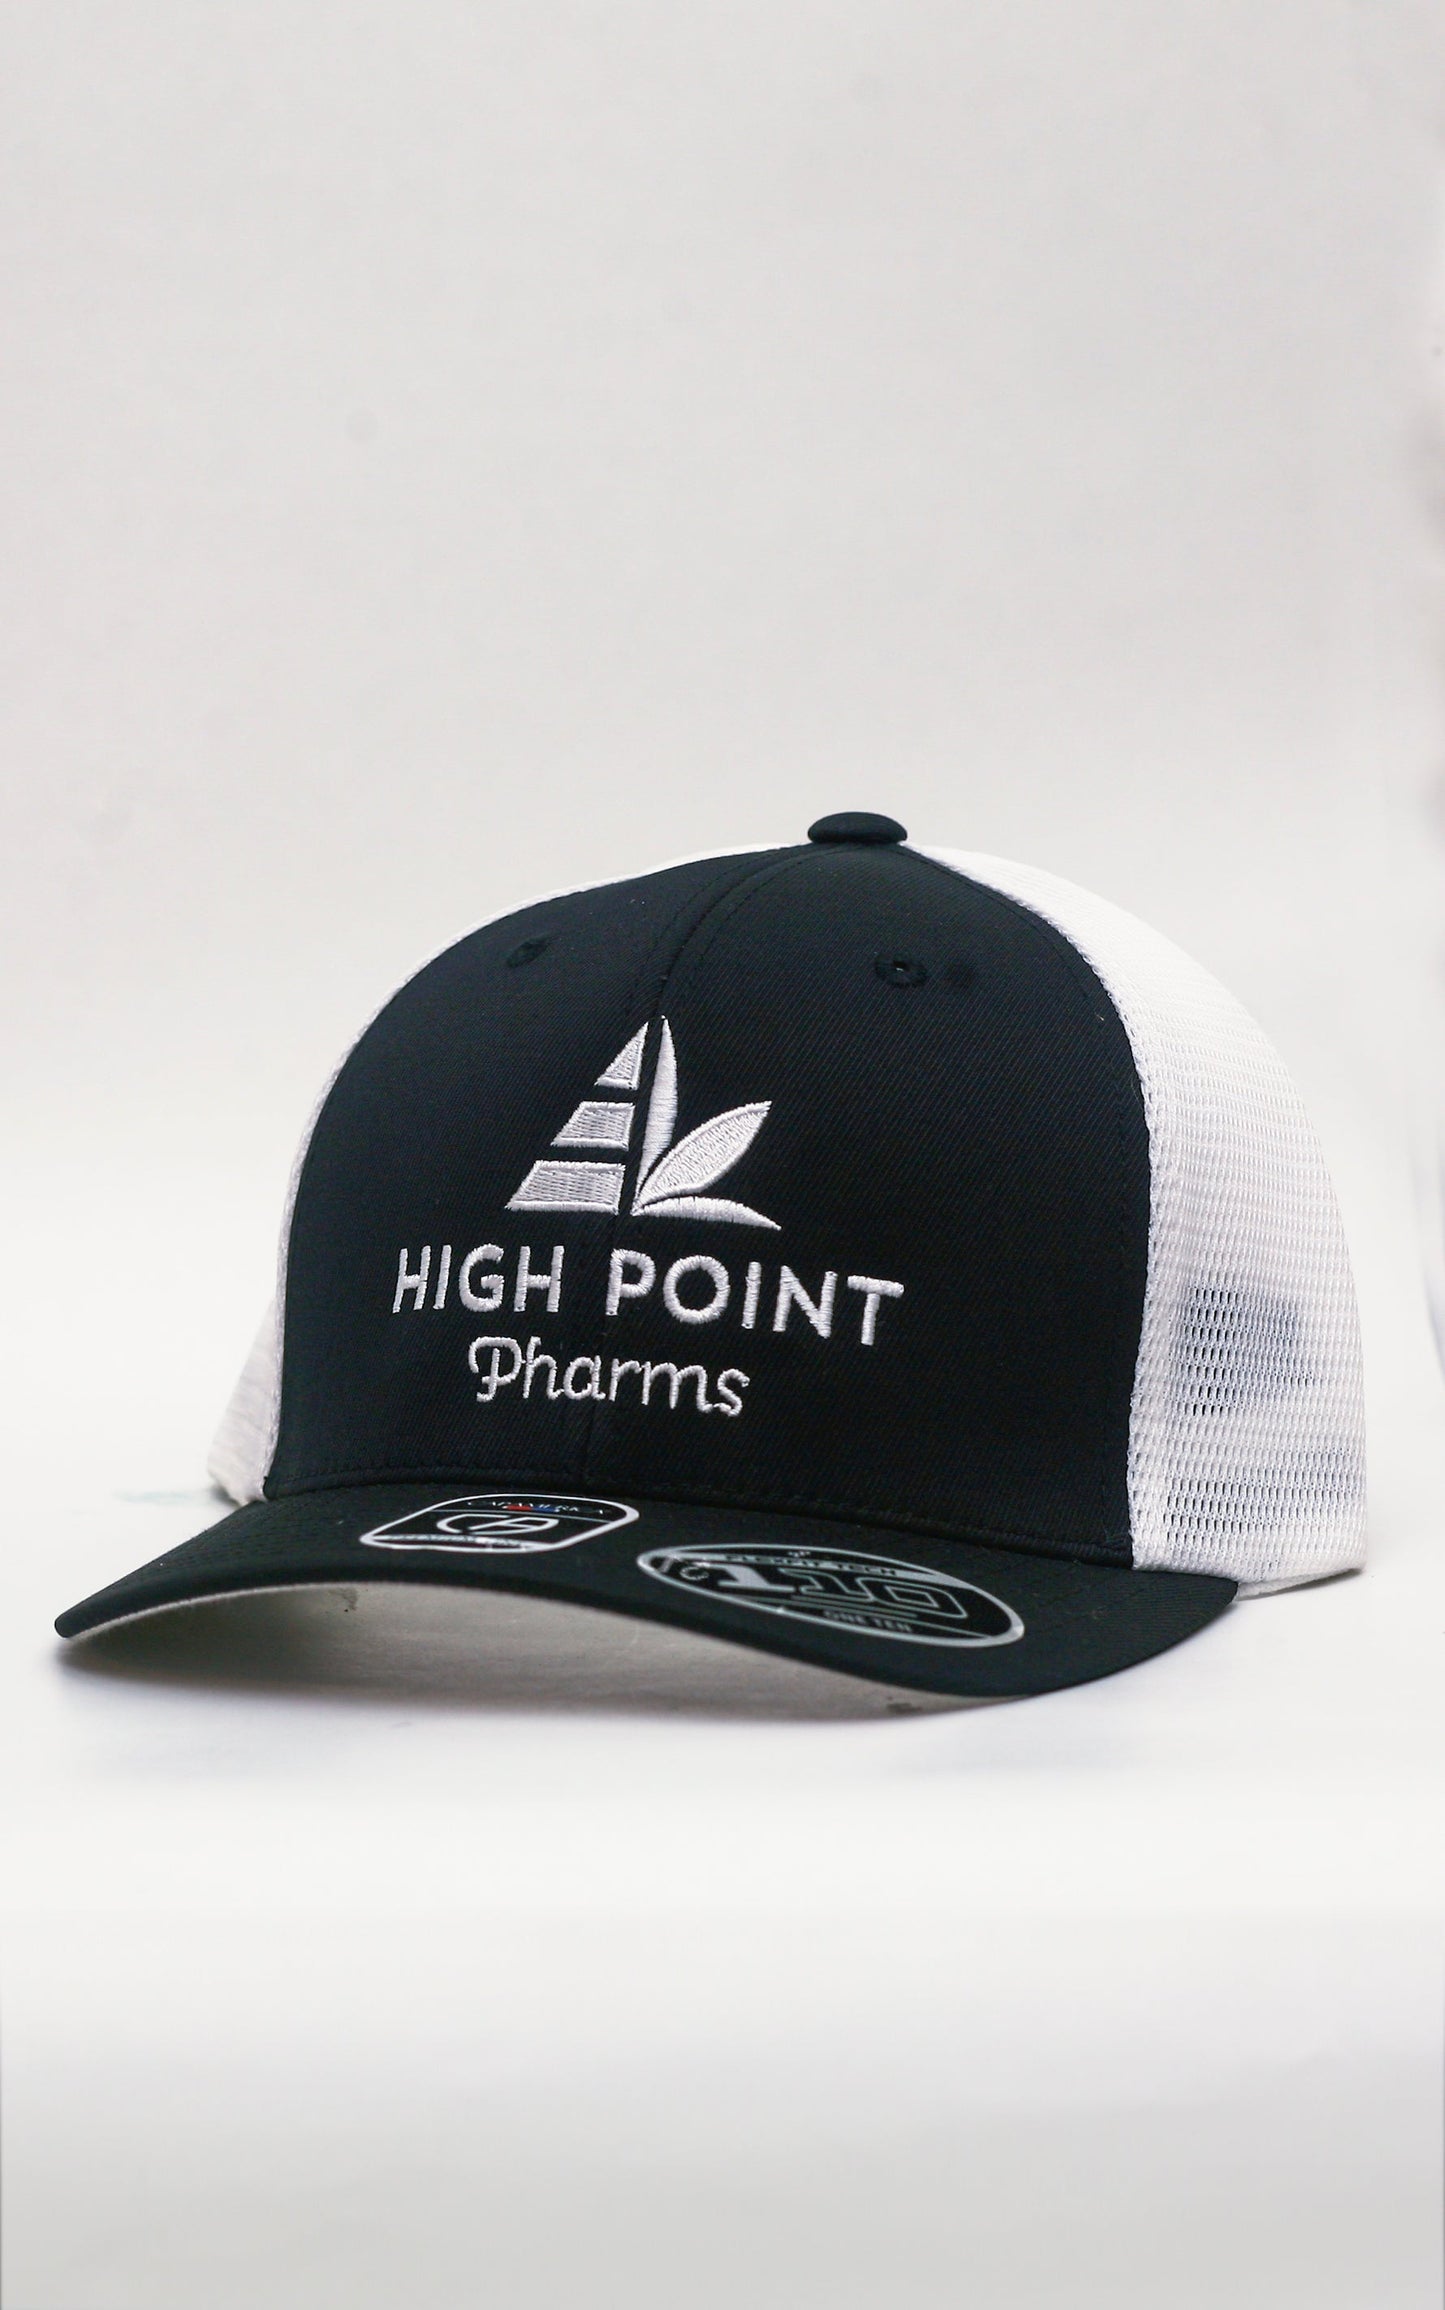 High Point Pharms Truckers Hat